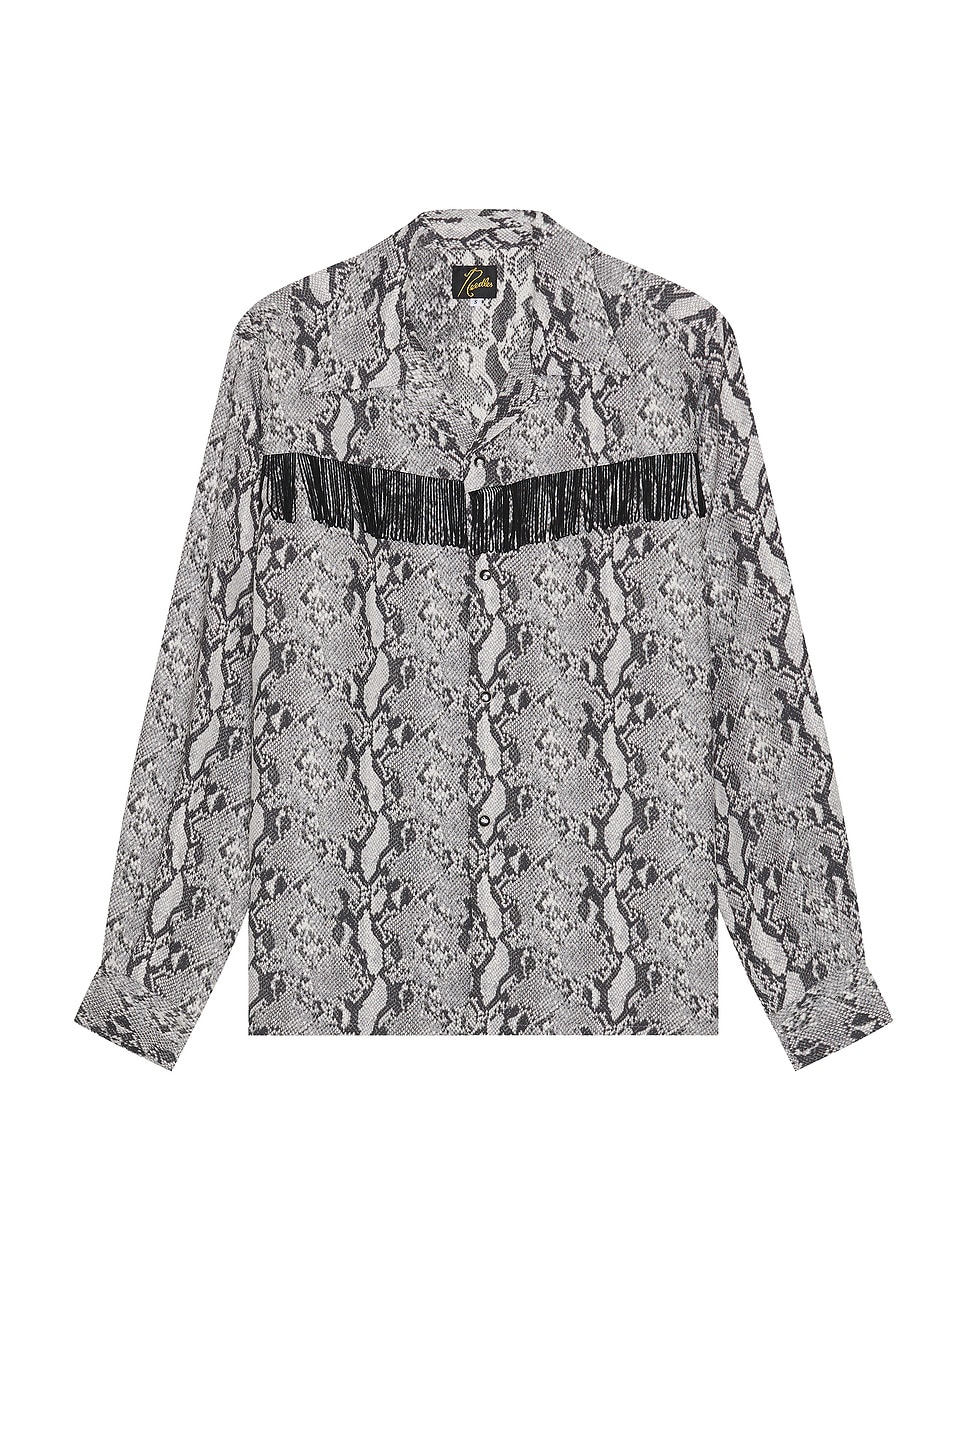 Fringe One Up Shirt Python In Charcoal in Grey